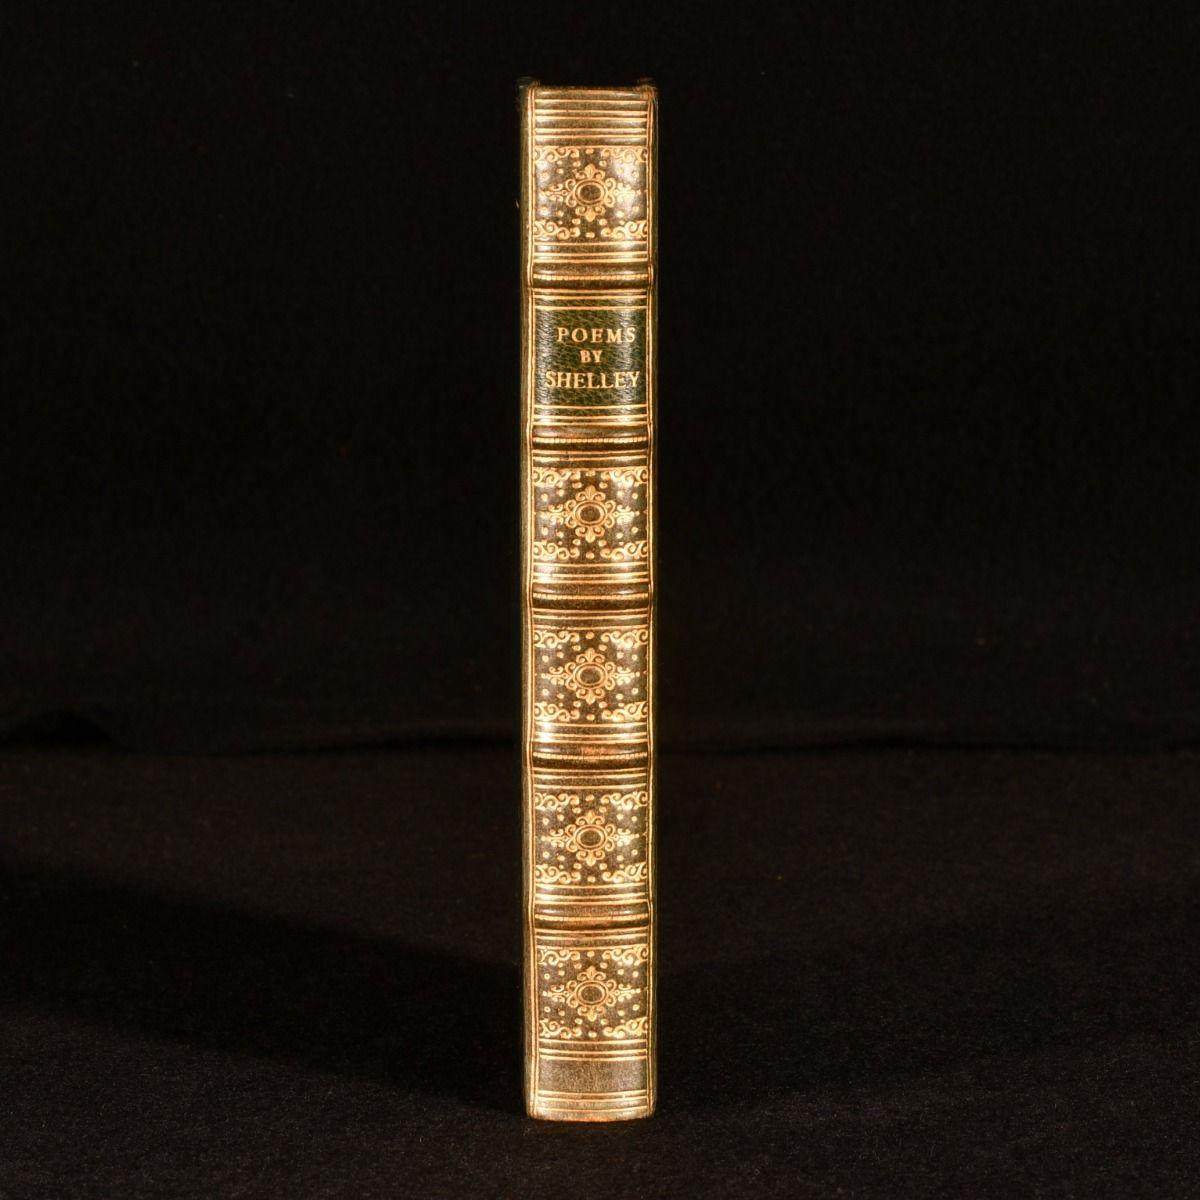 A smartly bound collection of poetry from Percy Bysshe Shelley.

With portrait frontispiece. A collection of poetry, including works such as: Hymn to Intellectual Beauty, Song of Proserpine, To a Skylark, Ode to the West Wind, Ozymandias, Adonais,